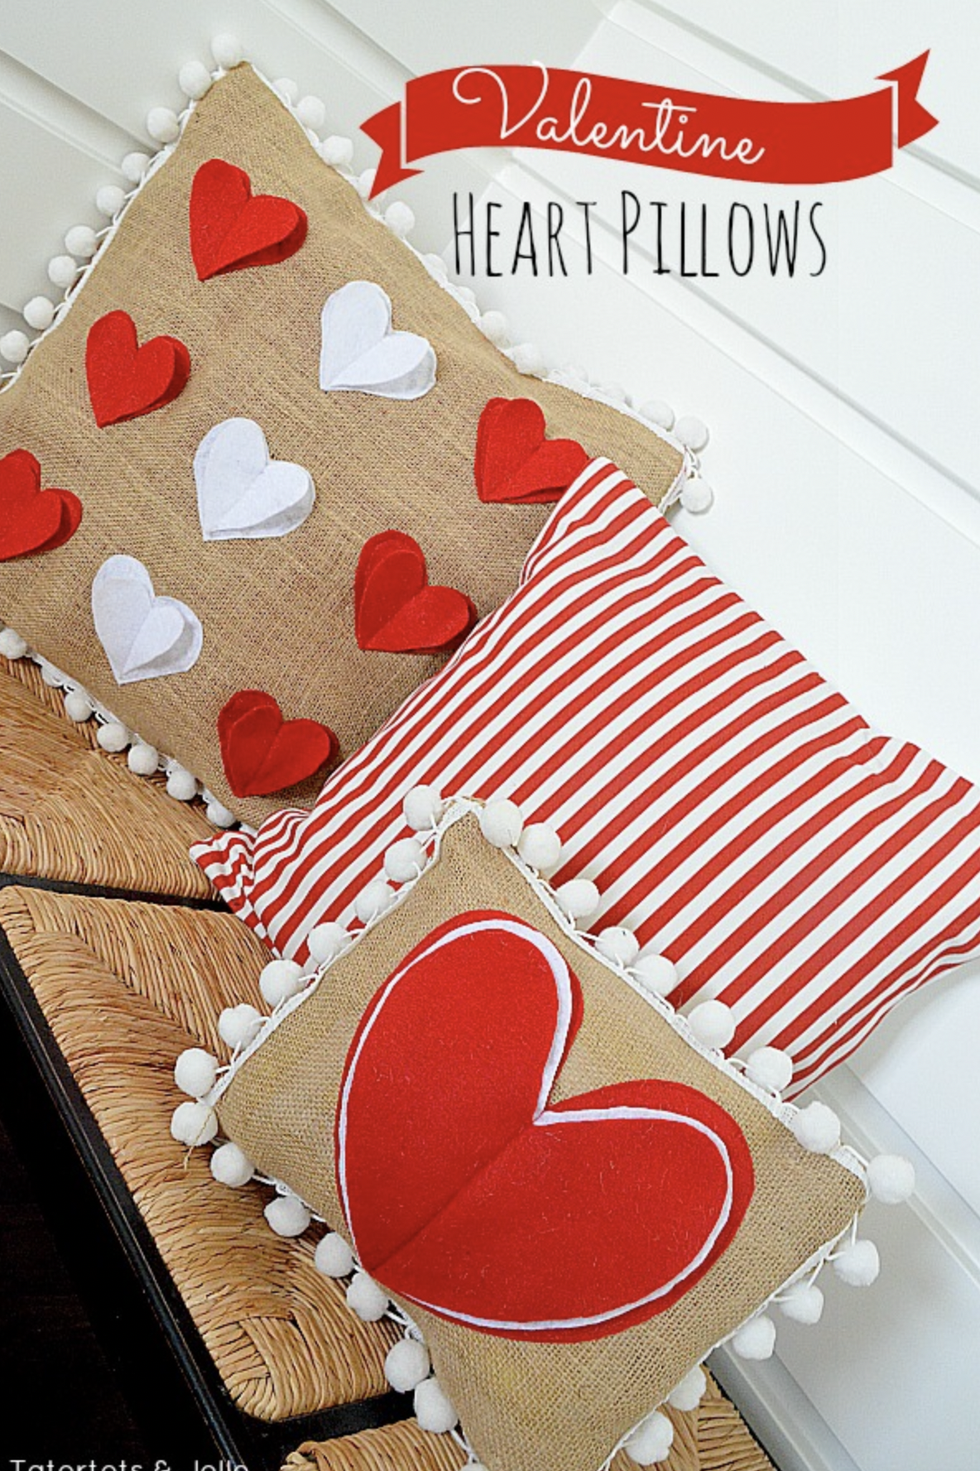 Painted Valentine's Day - Crafting Paper Package